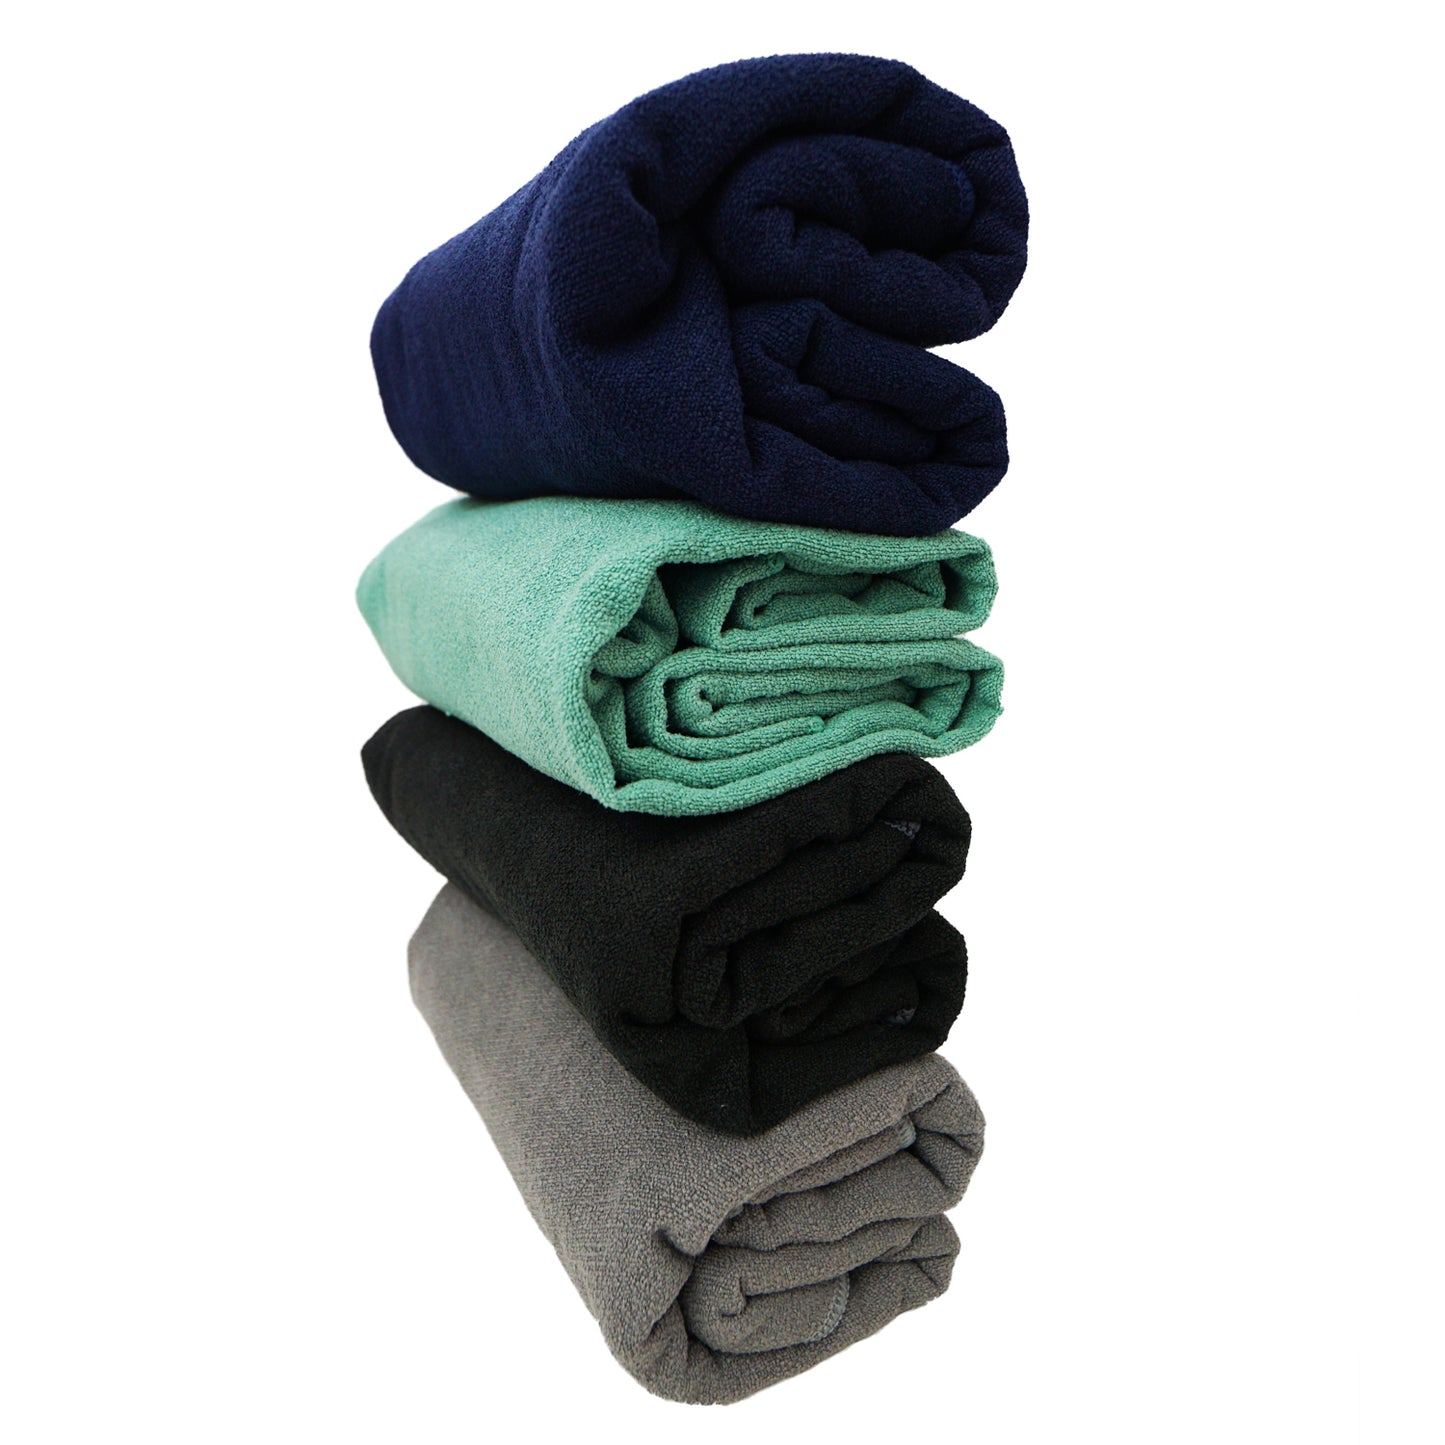 Yoga Mat Towel by YOGA Accessories